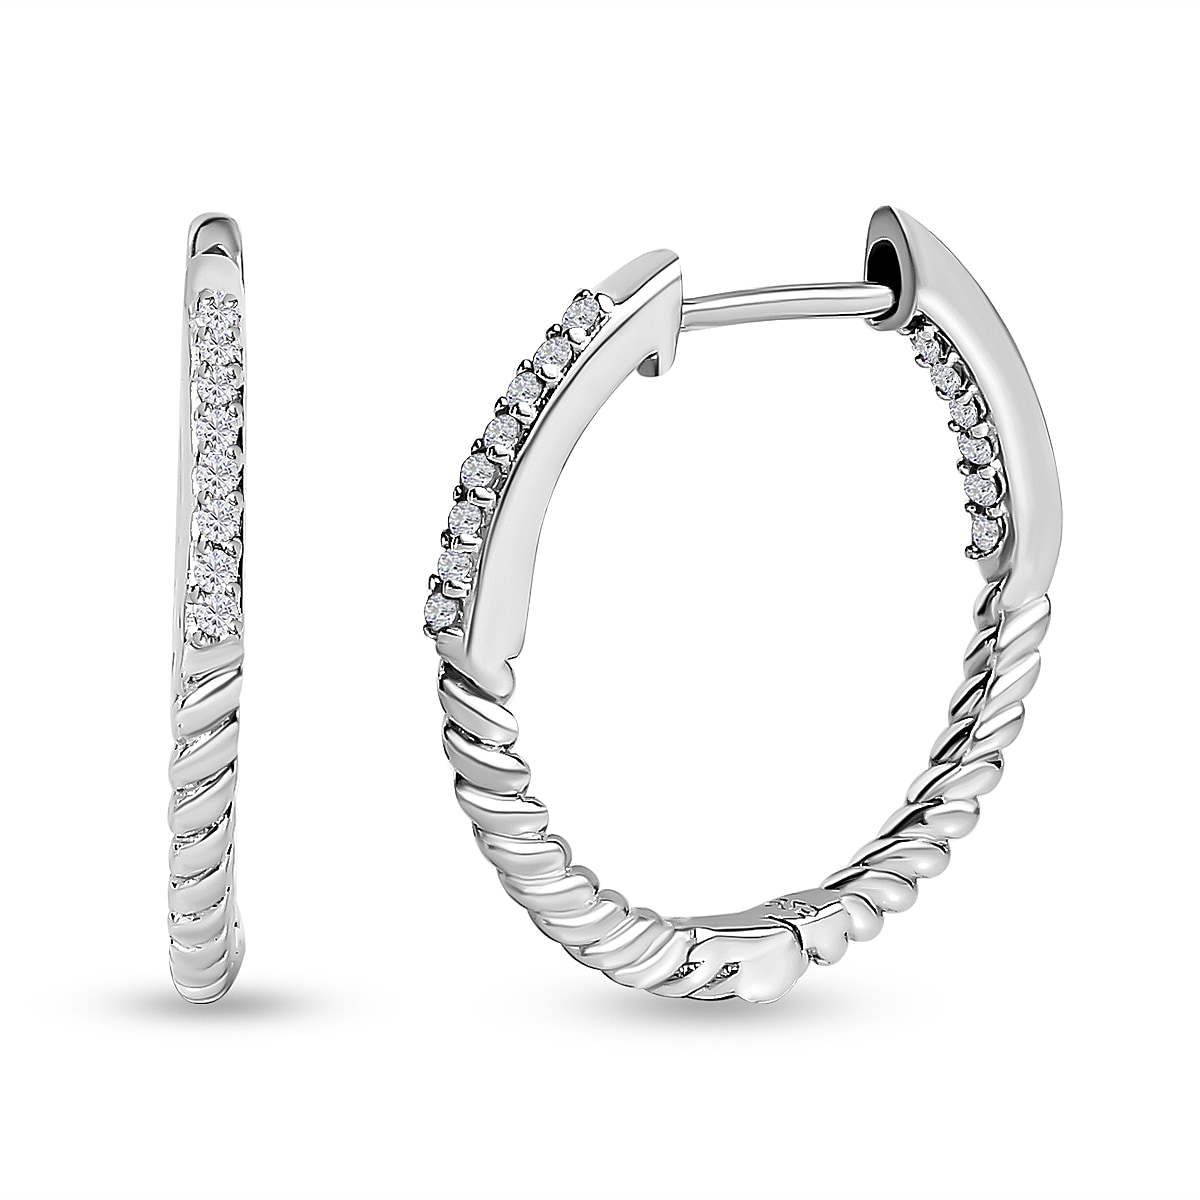 White Diamond Hoop Earring in Platinum Overlay Sterling Silver 0.17 ct 0.168 Ct.